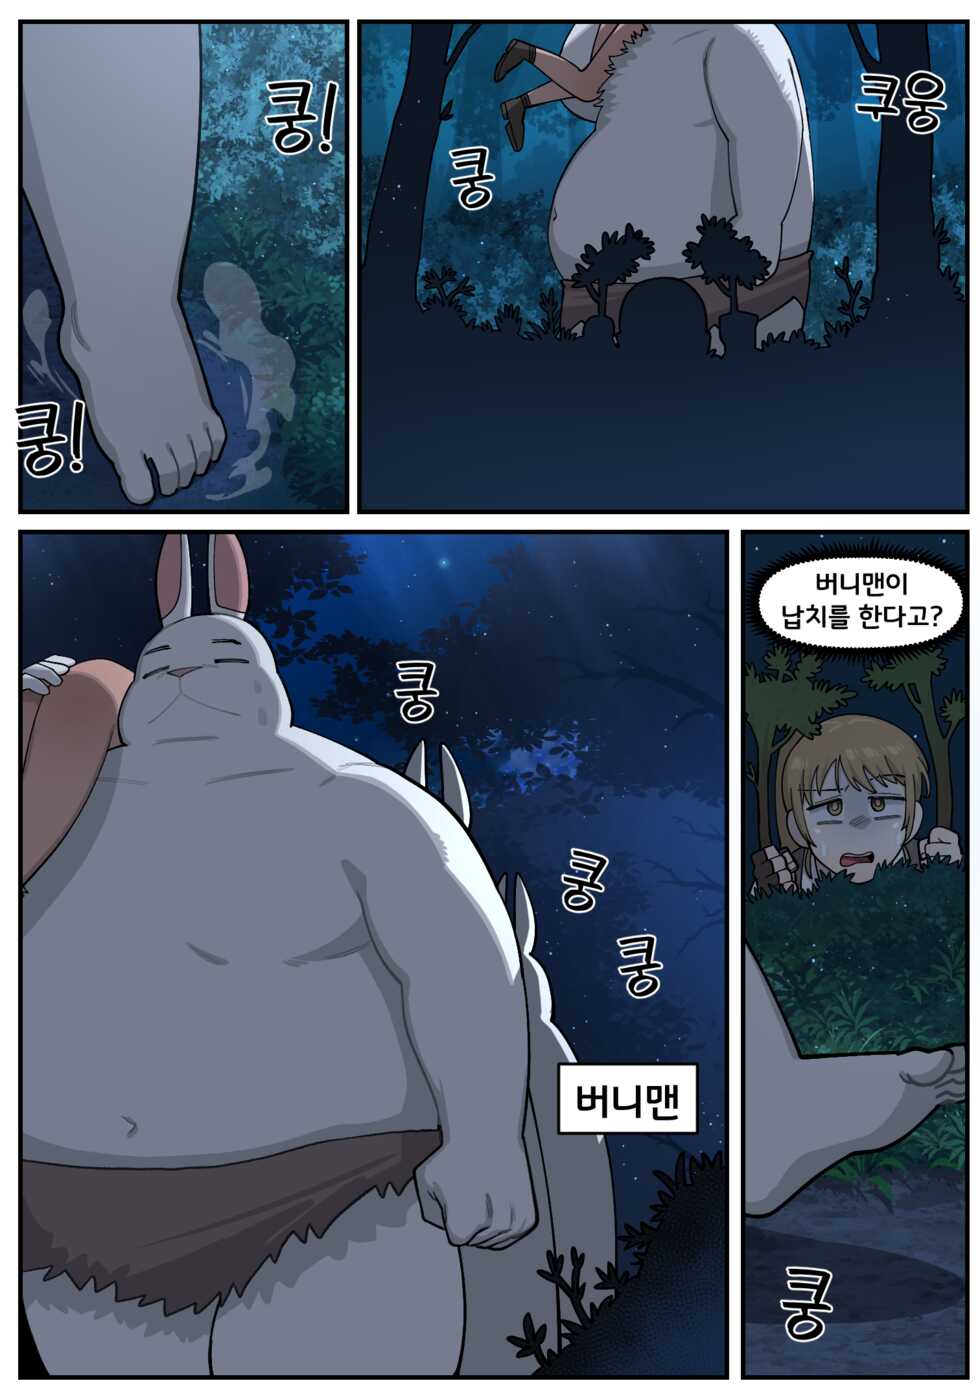 [6no1] Bunnyman Hunting Mission Part 1 (22.06) [Korean] [Uncensored] - Page 4